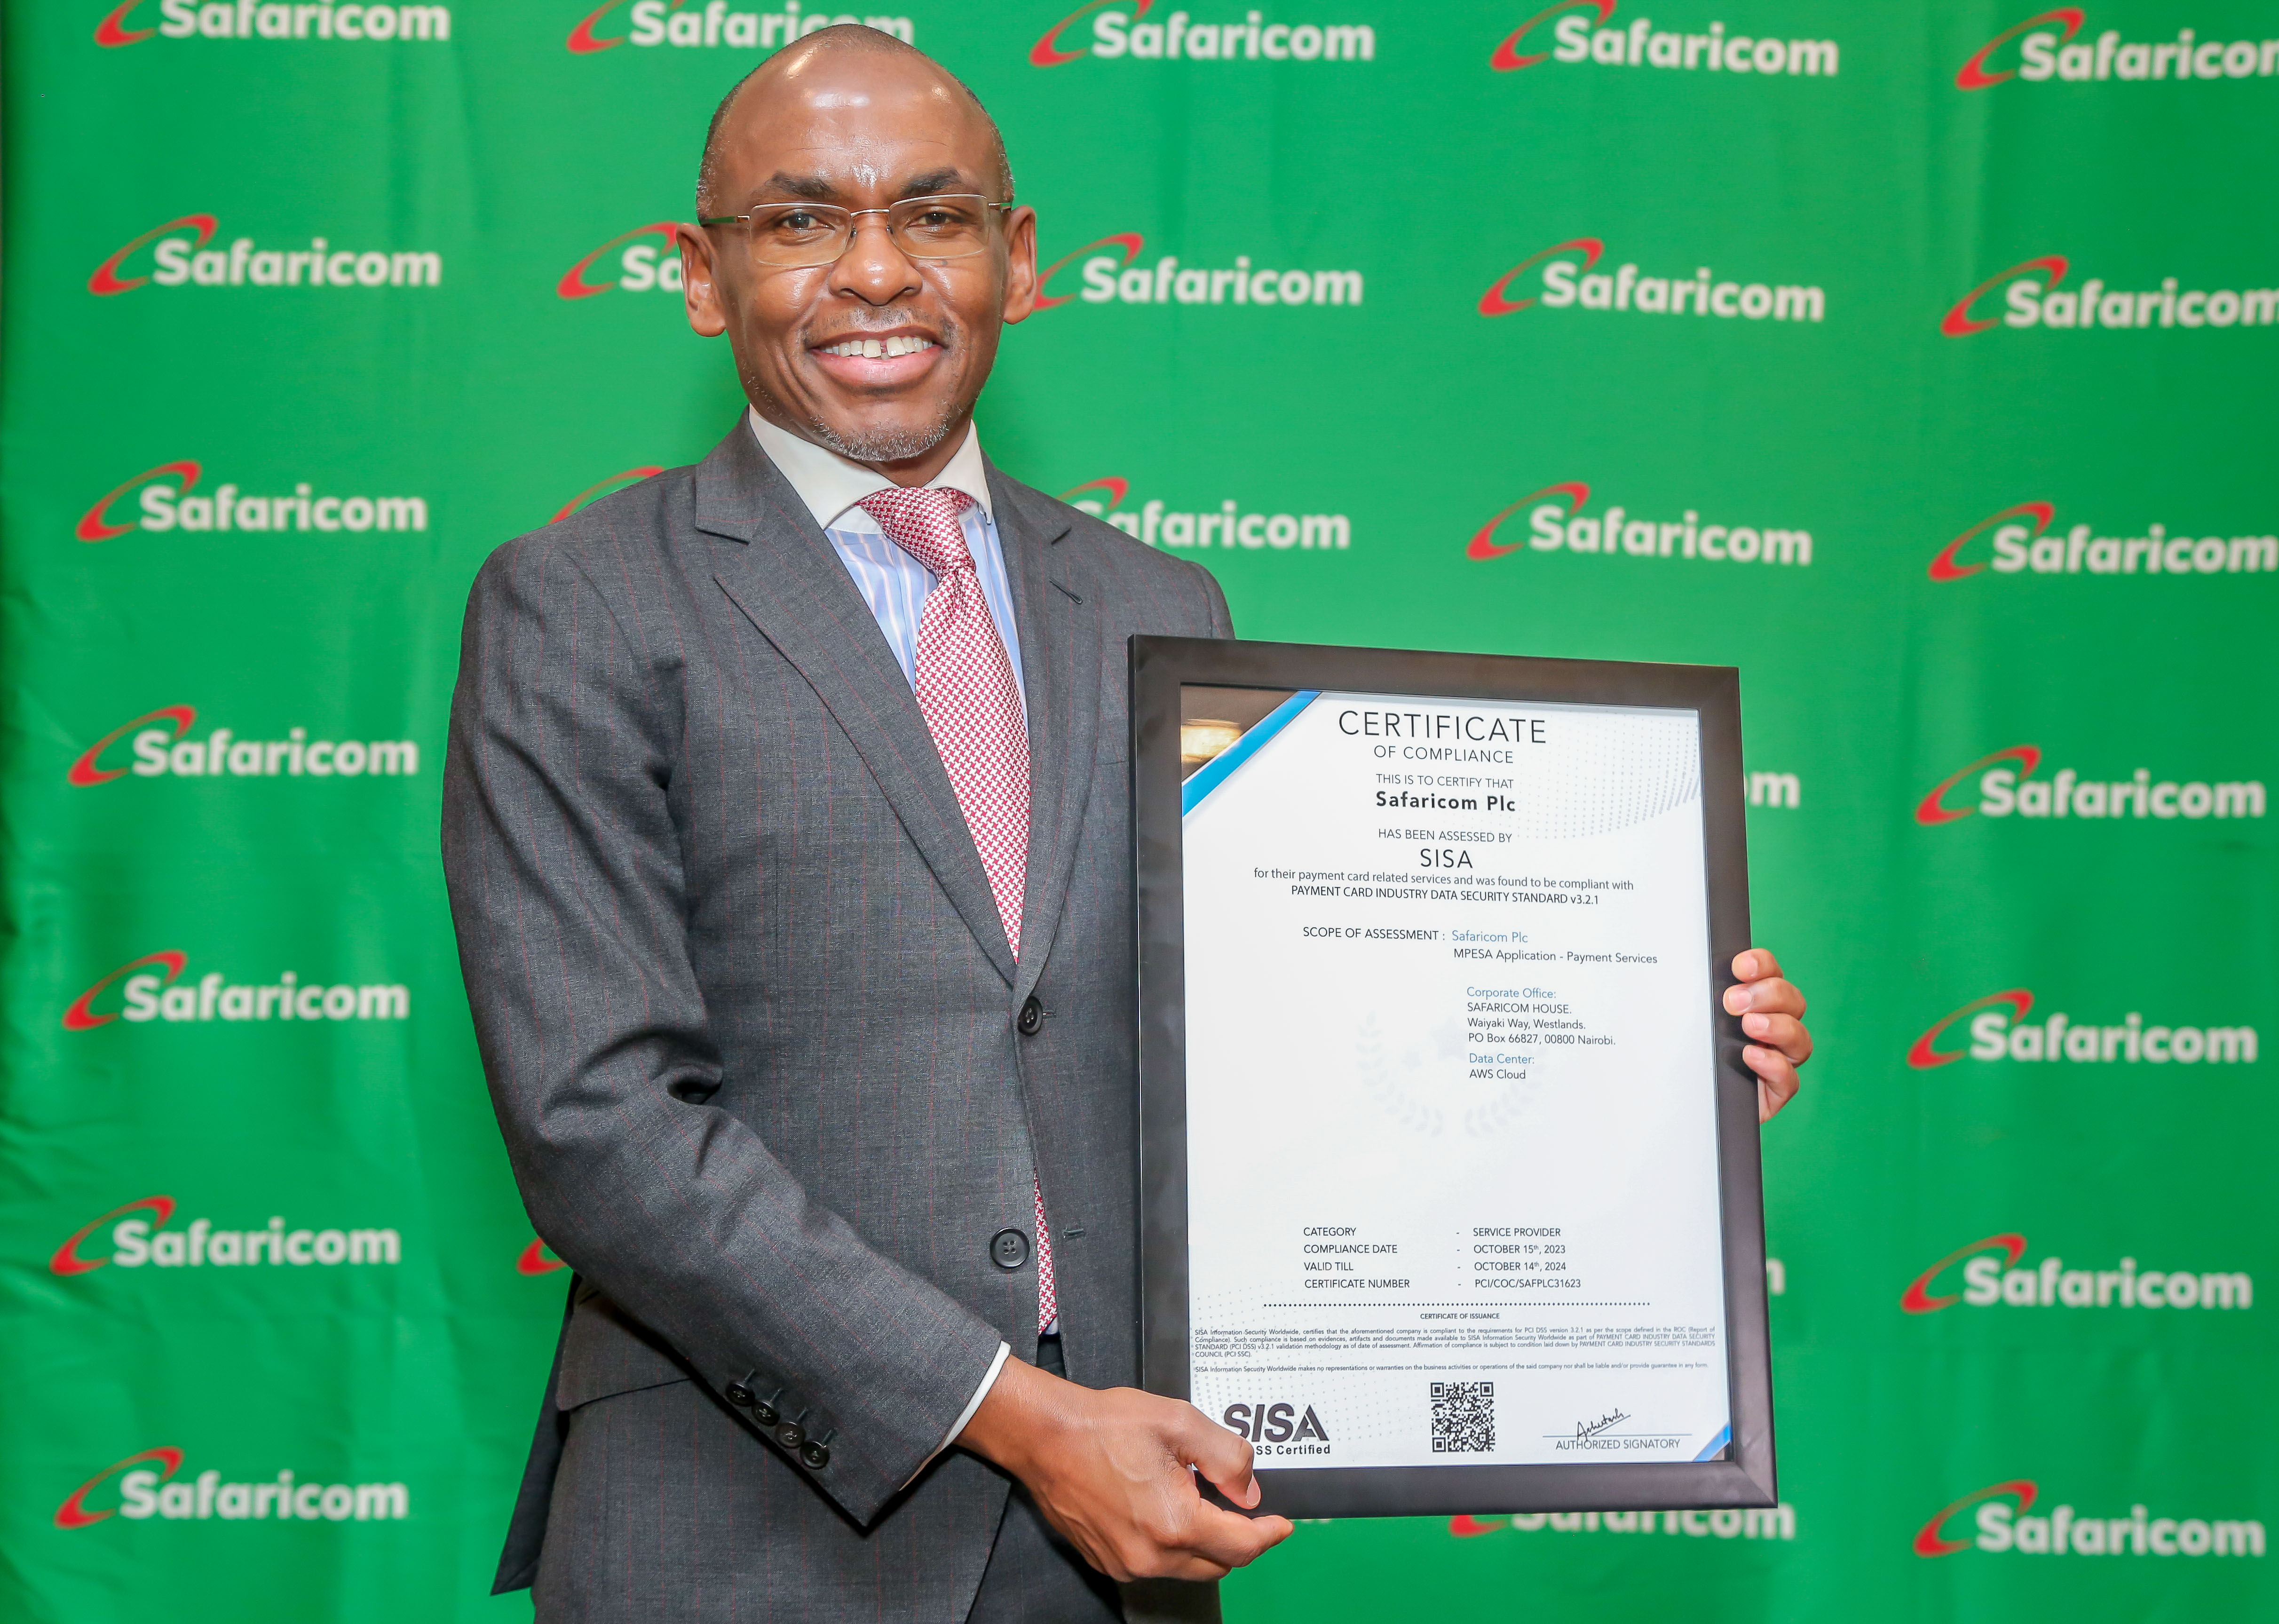 Safaricom CEO Peter Ndegwa receives a Certificate of compliance assessed by SISA for their payment card Industry Data Security Standard.